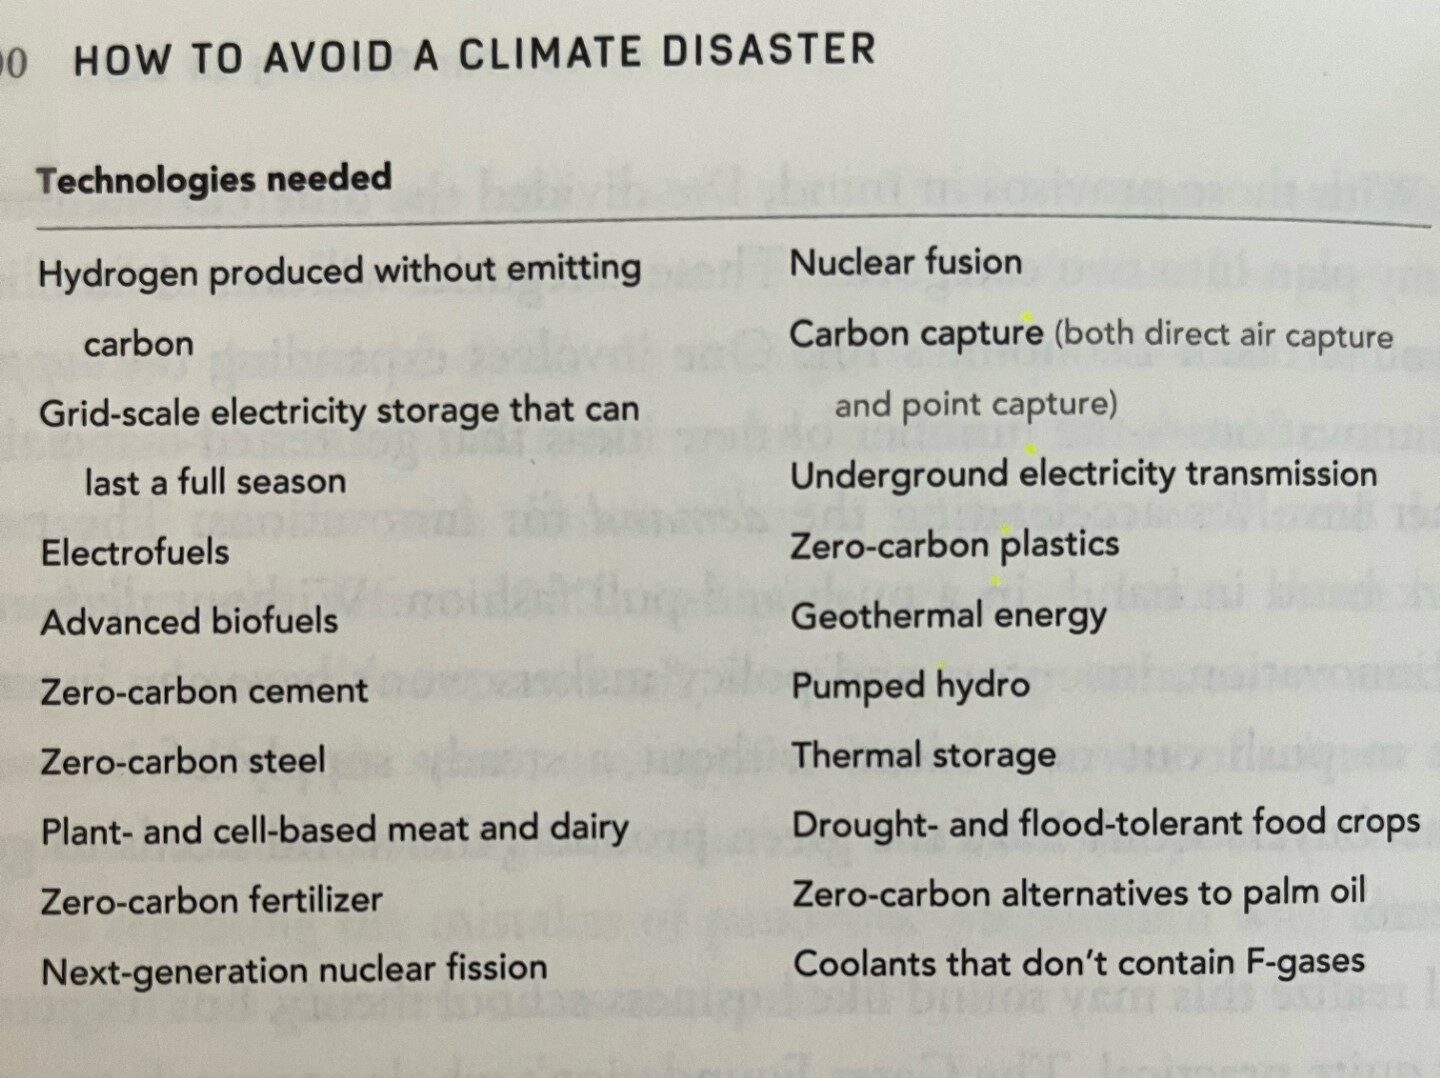 HOW TO AVOID A CLIMATE DISASTER 
Hydrogen produced without emitting carbon 
Grid-scale electricity storage that can last a full season 
Electrofuels 
Advanced biofuels 
Zero-carbon cement 
Zero-carbon steel 
Plant- and cell-based meat and dairy 
Zero-carbon fertilizer 
Next-generation nuclear fission 
Nuclear fusion 
Carbon capture (both direct air capture and point capture) 
Underground electricity transmission 
Zero-carbon plastics 
Geothermal energy 
Pumped hydro 
Thermal storage 
Drought- and flood-tolerant food crops 
Zero-carbon alternatives to palm oil 
Coolants that don't contain F-gases 